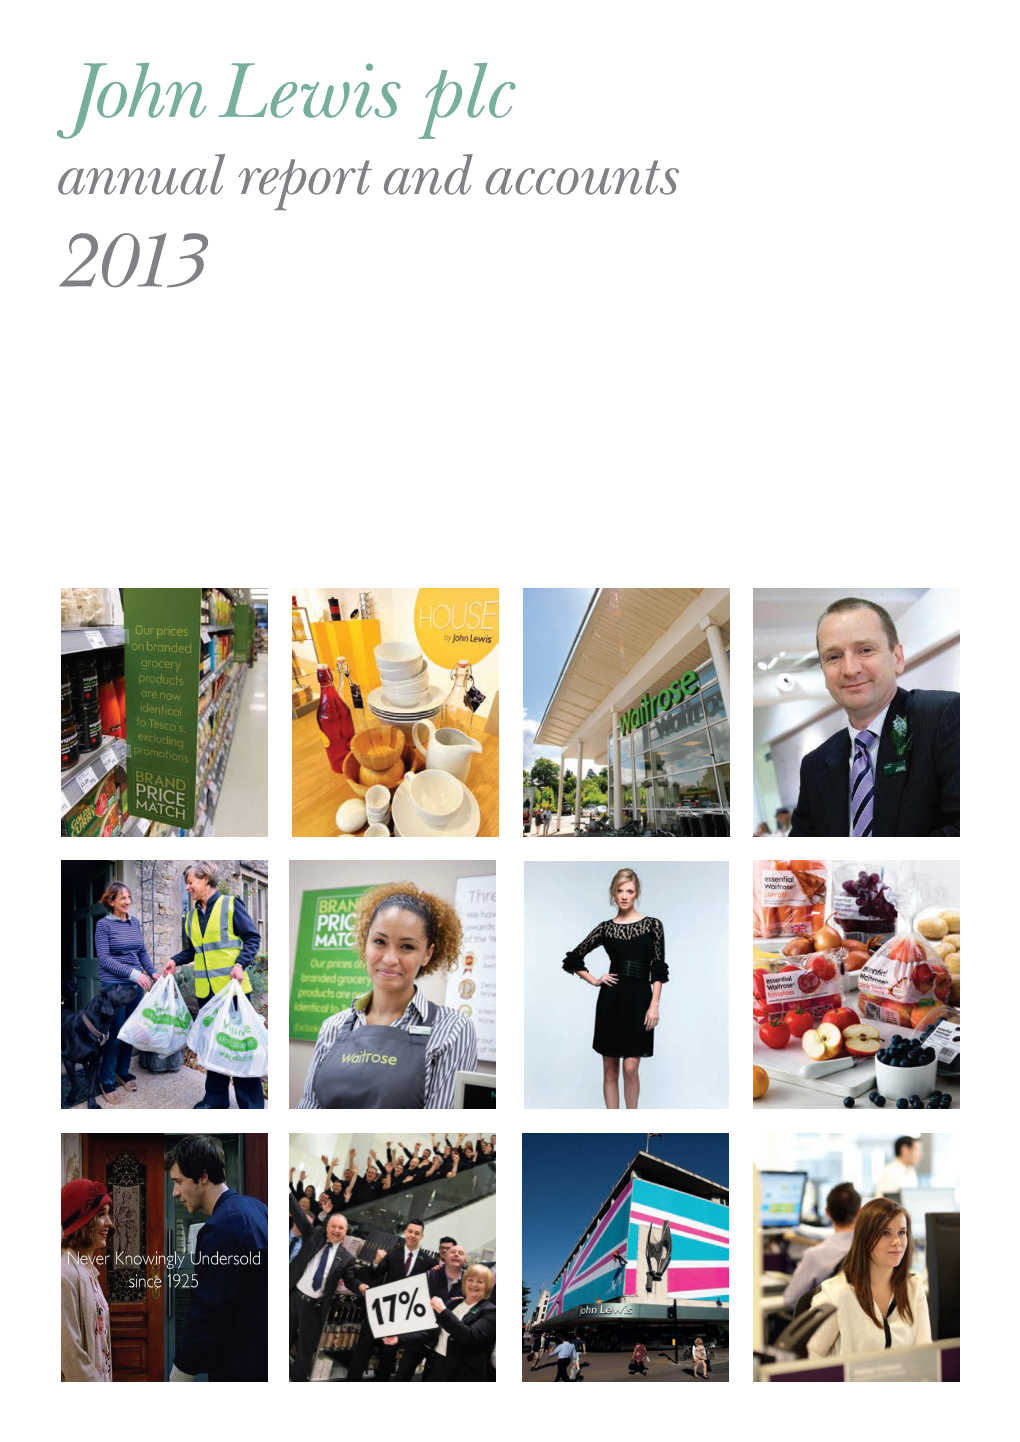 John Lewis Plc Annual Report and Accounts 2013